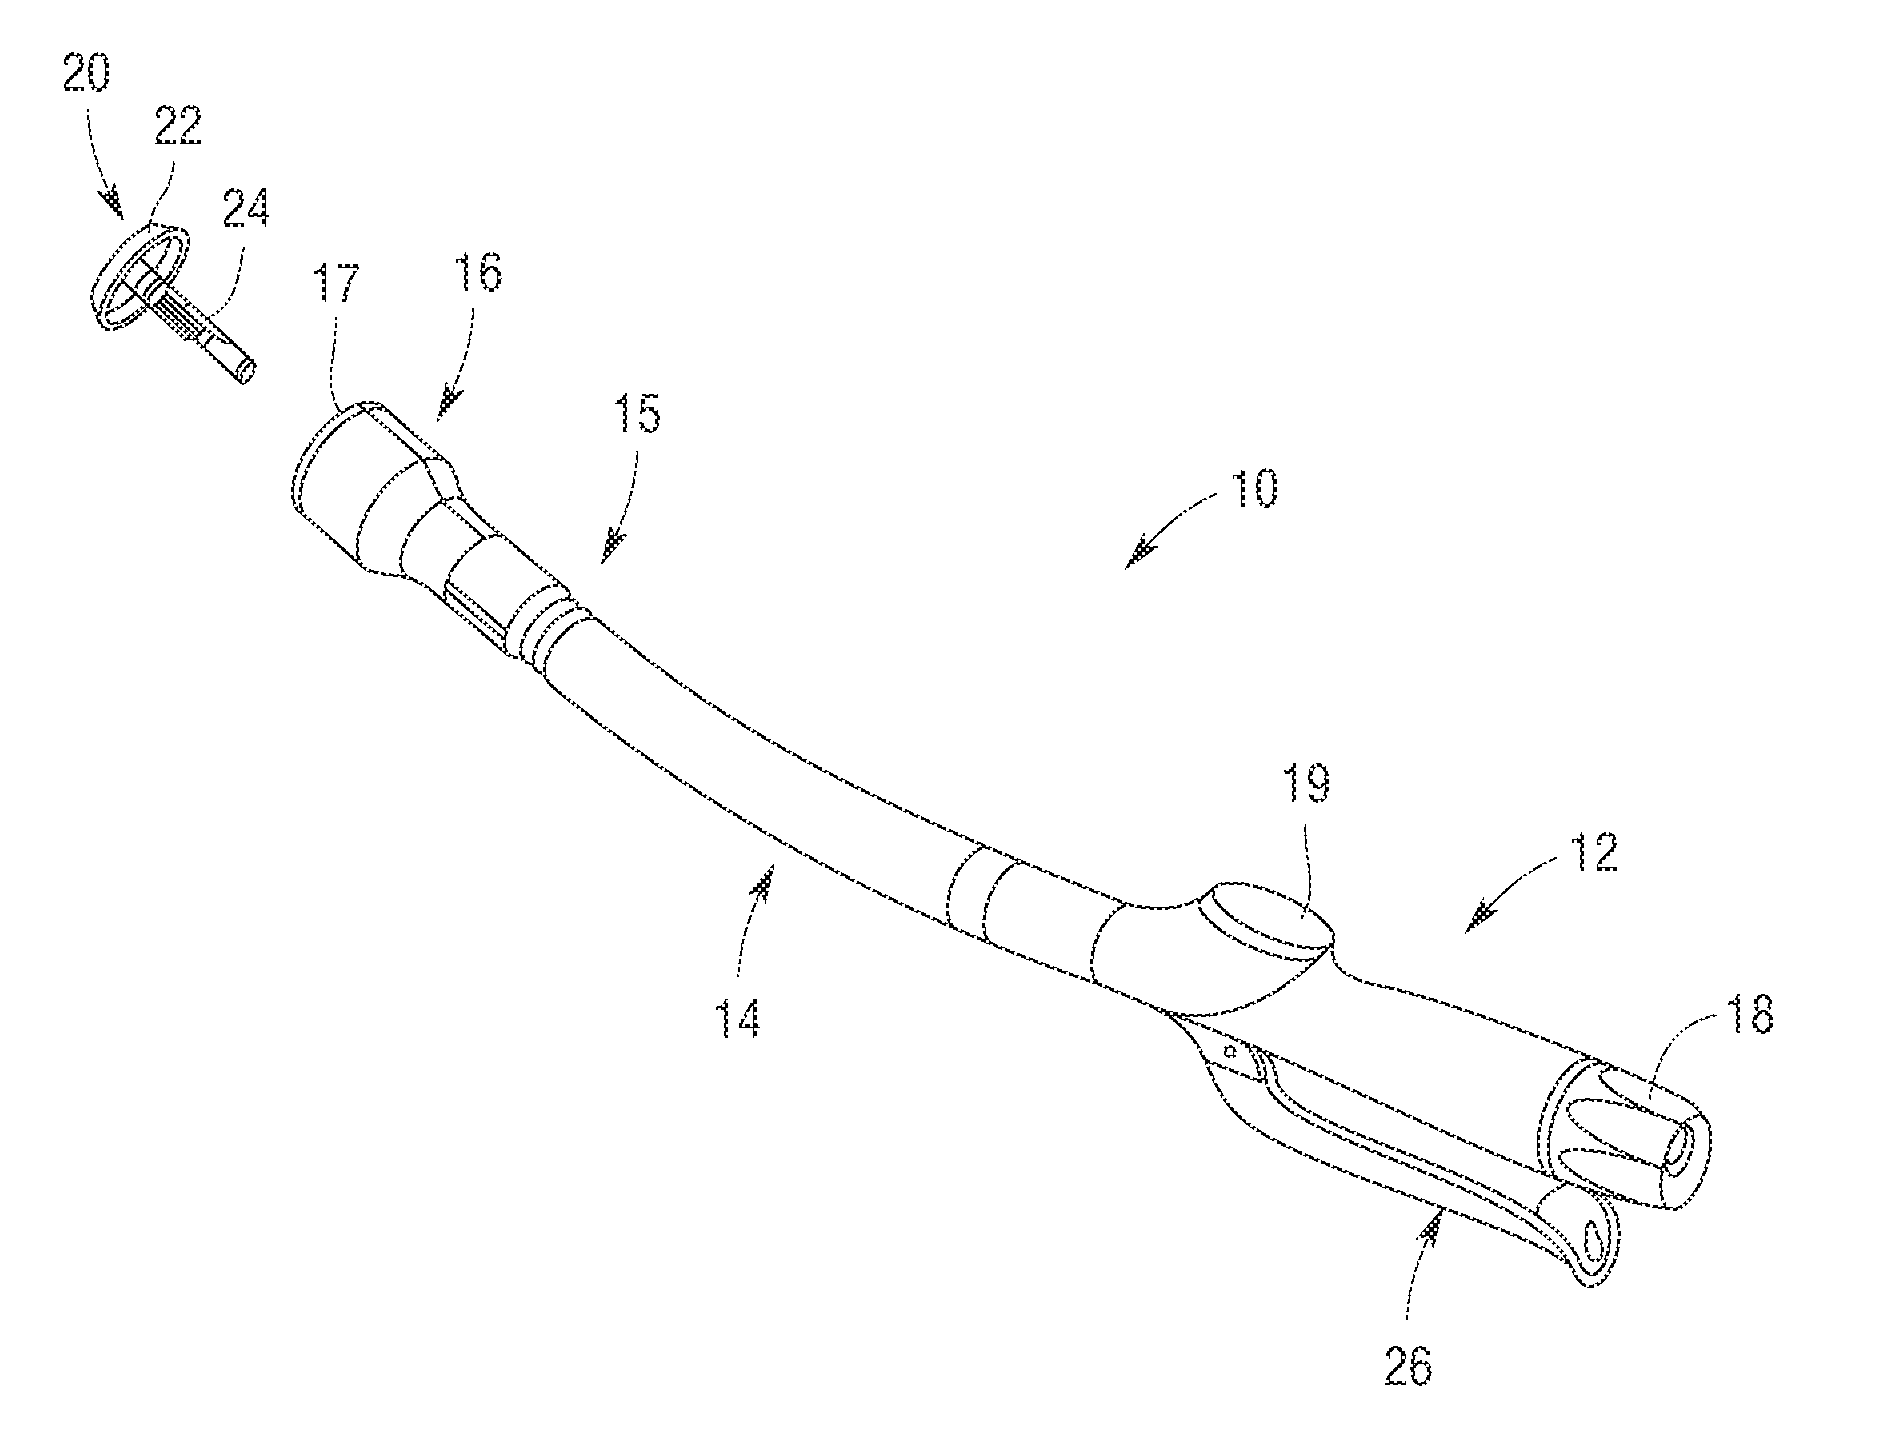 Devices and methods for introducing a surgical circular stapling instrument into a patient